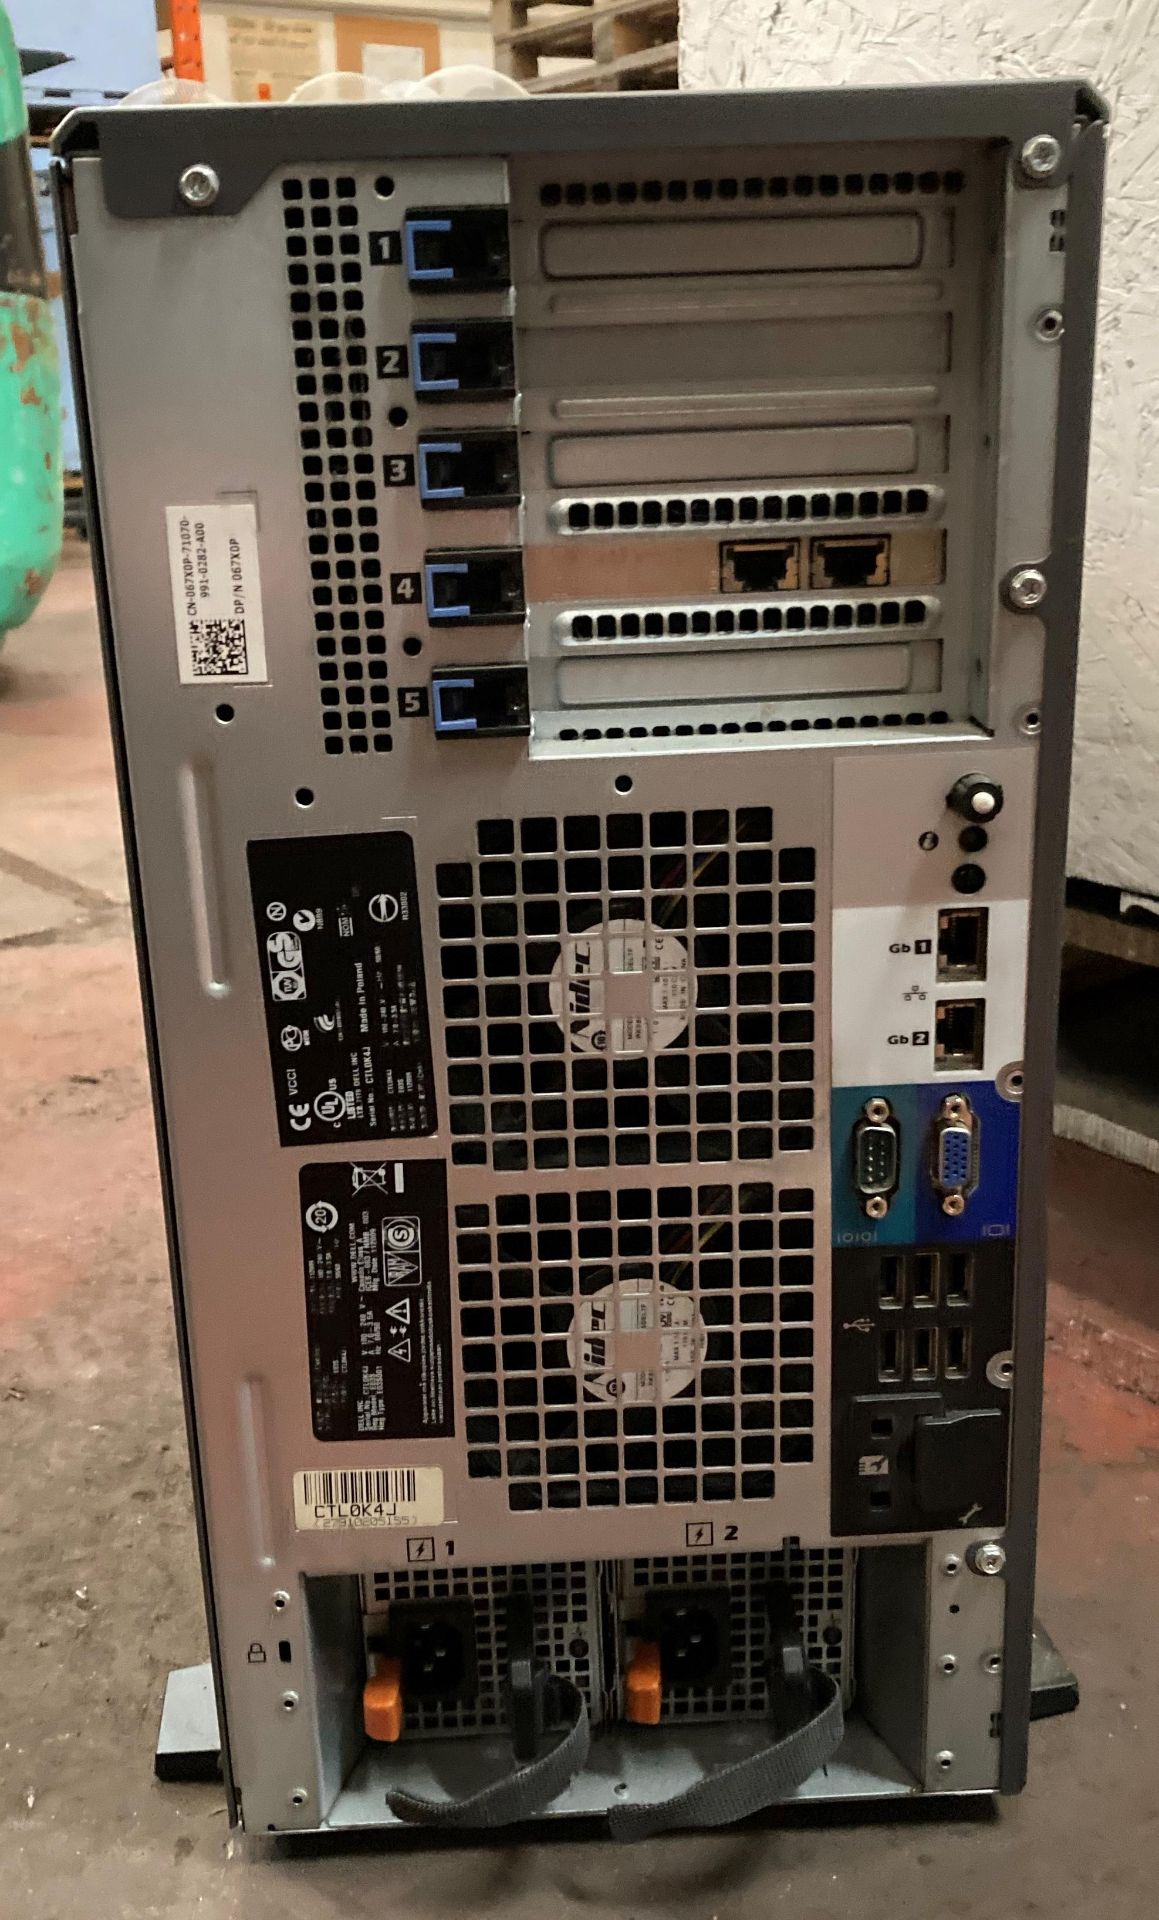 Dell Power Edge T610 server (collection address: Unit 6A, Church Street, Mexborough, - Image 2 of 2